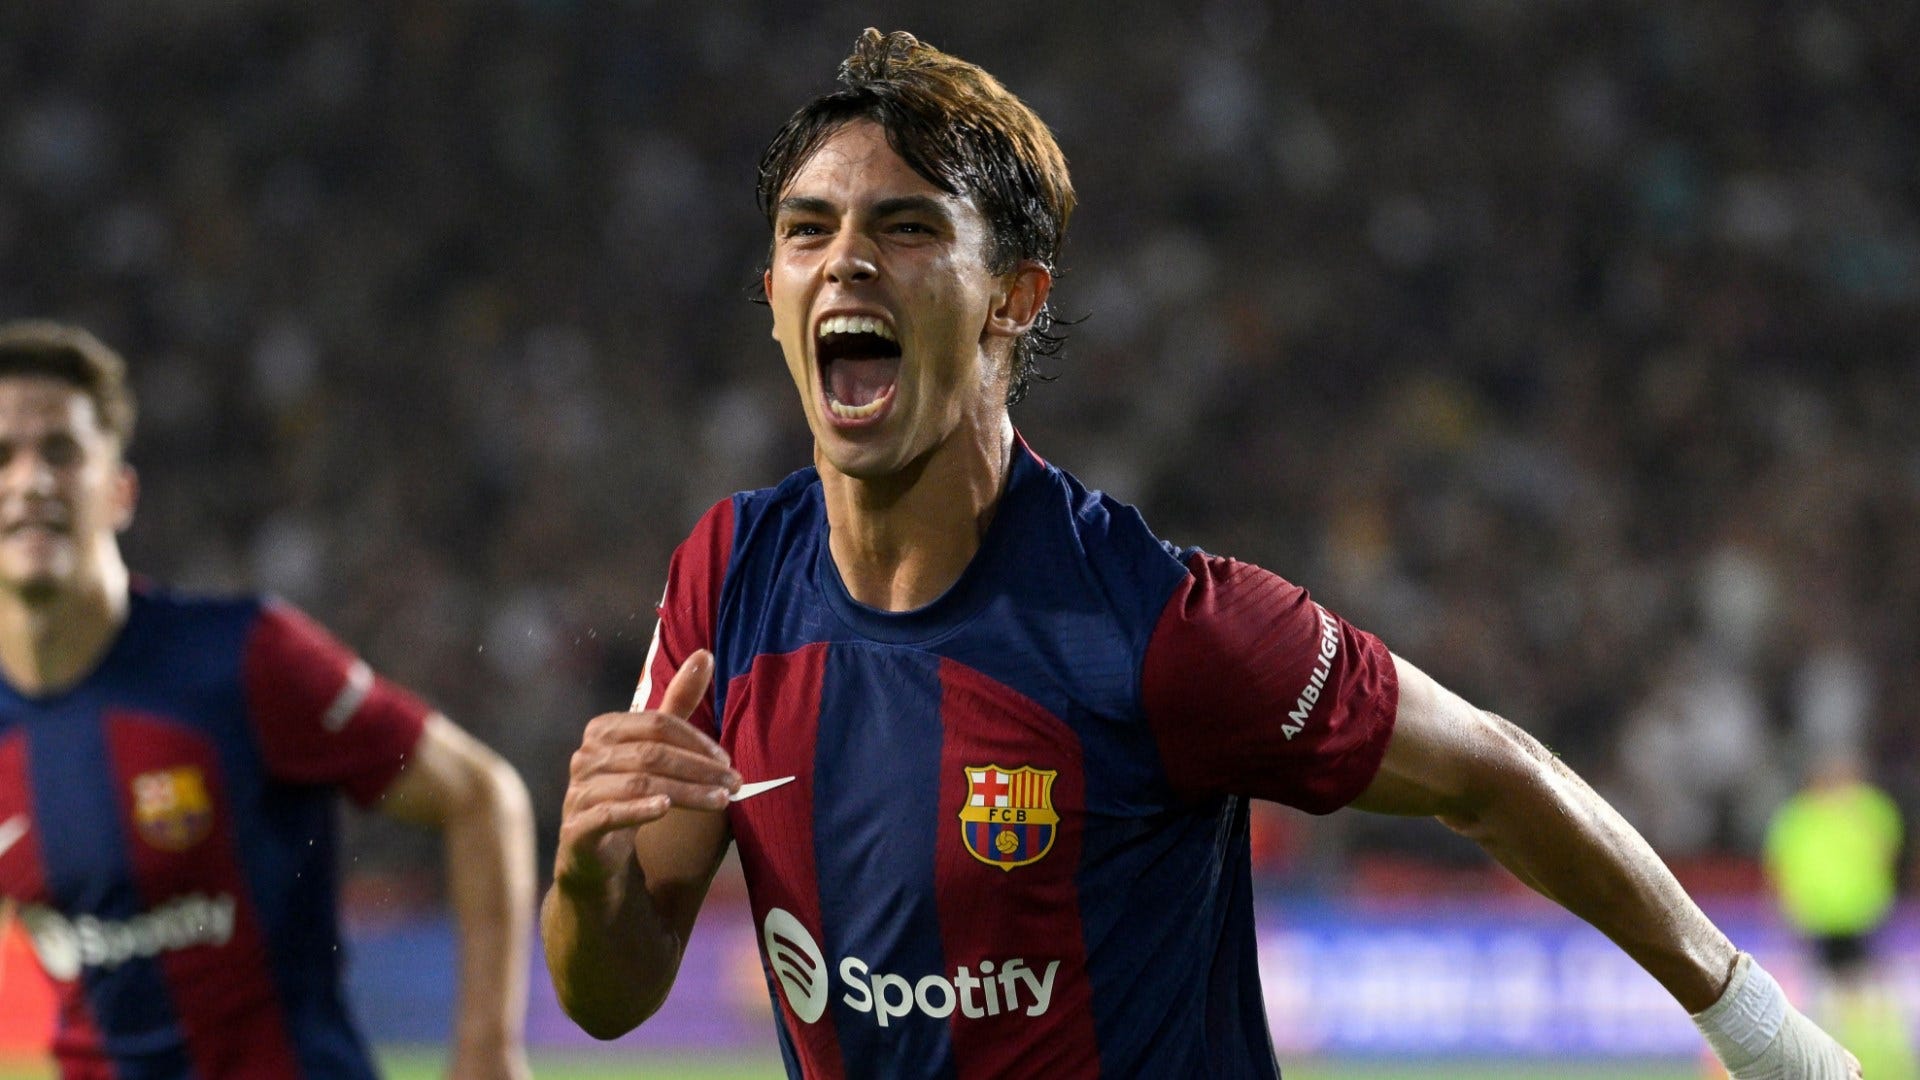 I'm having a good time' - Joao Felix says he is happy at Barcelona amid reports La Liga champions want to buy him from Atletico Madrid | Goal.com